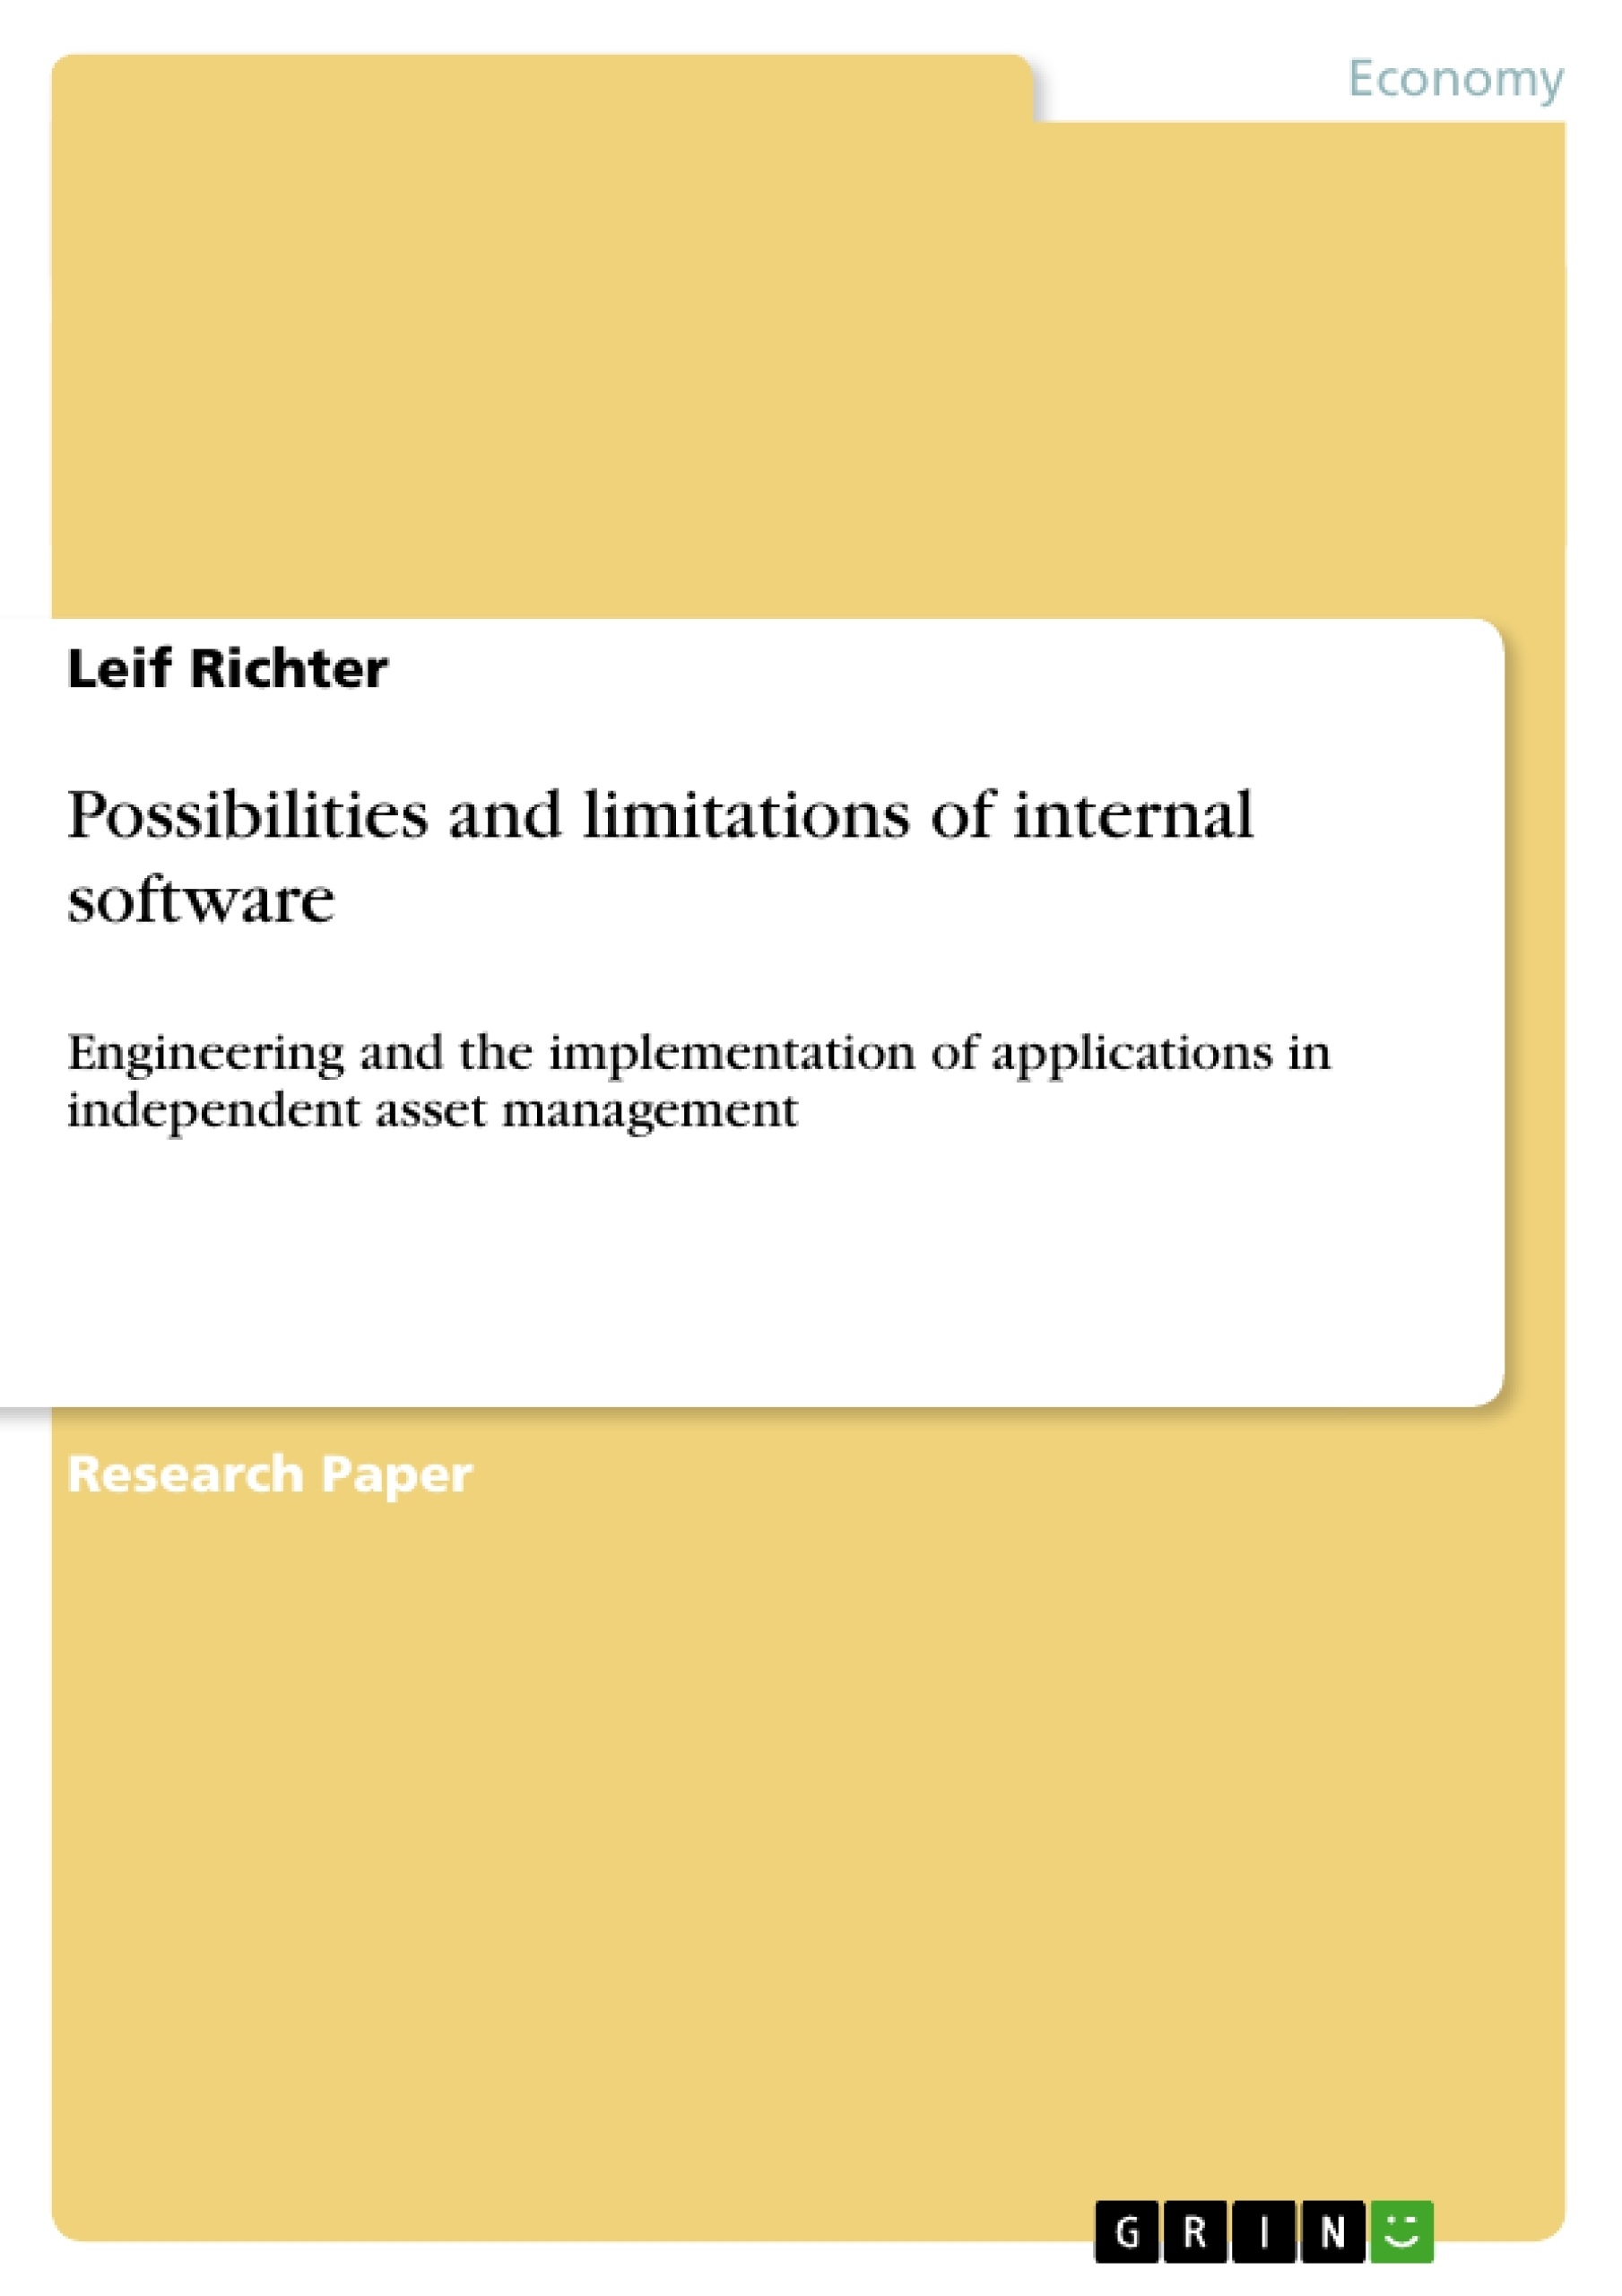 Titre: Possibilities and limitations of internal software